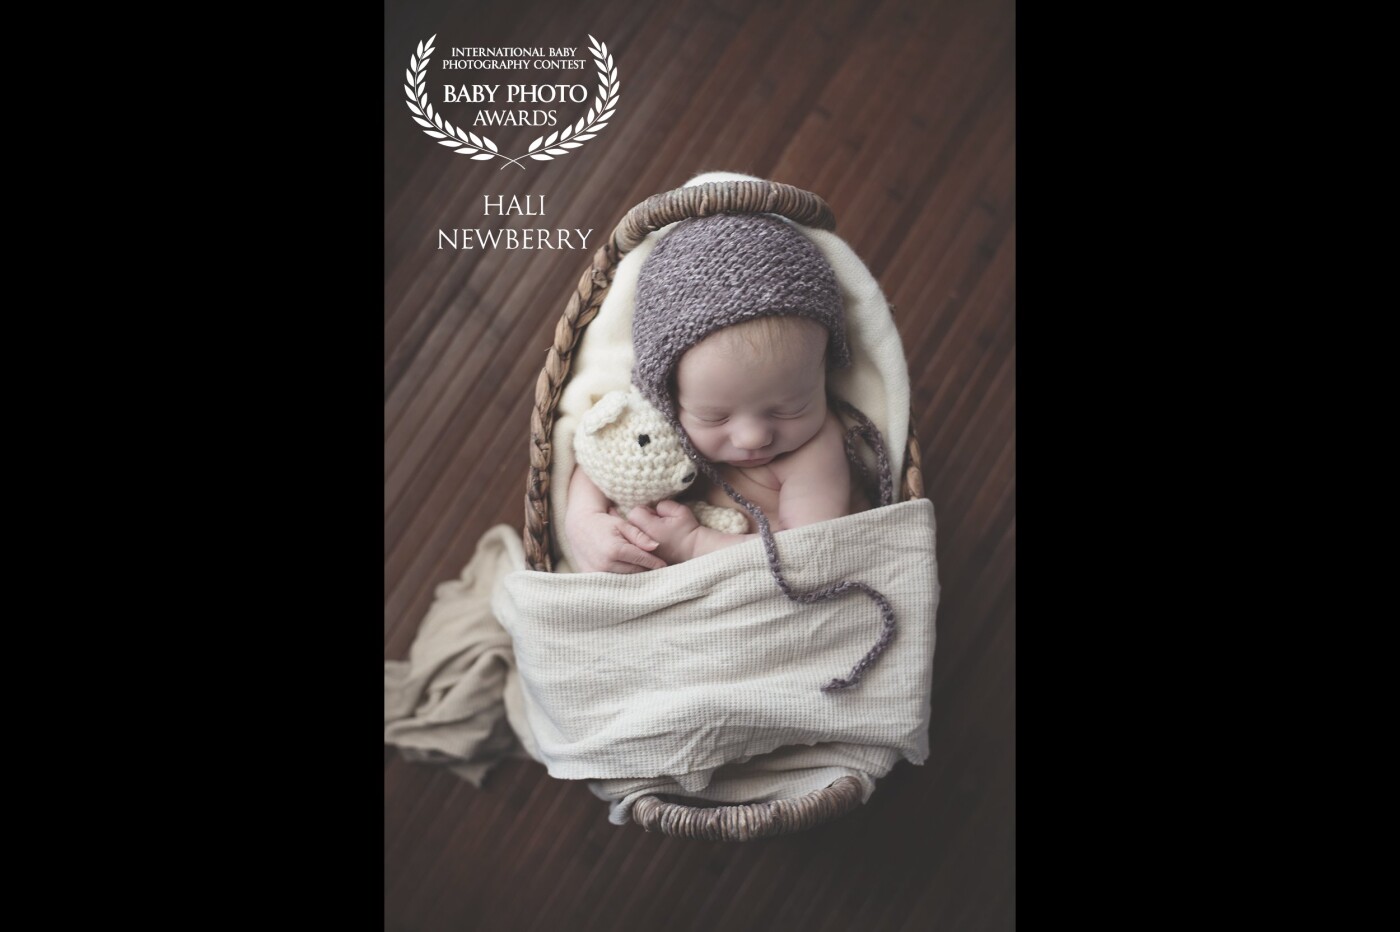 I traveled to the home of this sweet baby to take his newborn photos . He was such a perfect little model . All natural light was used in his photos .